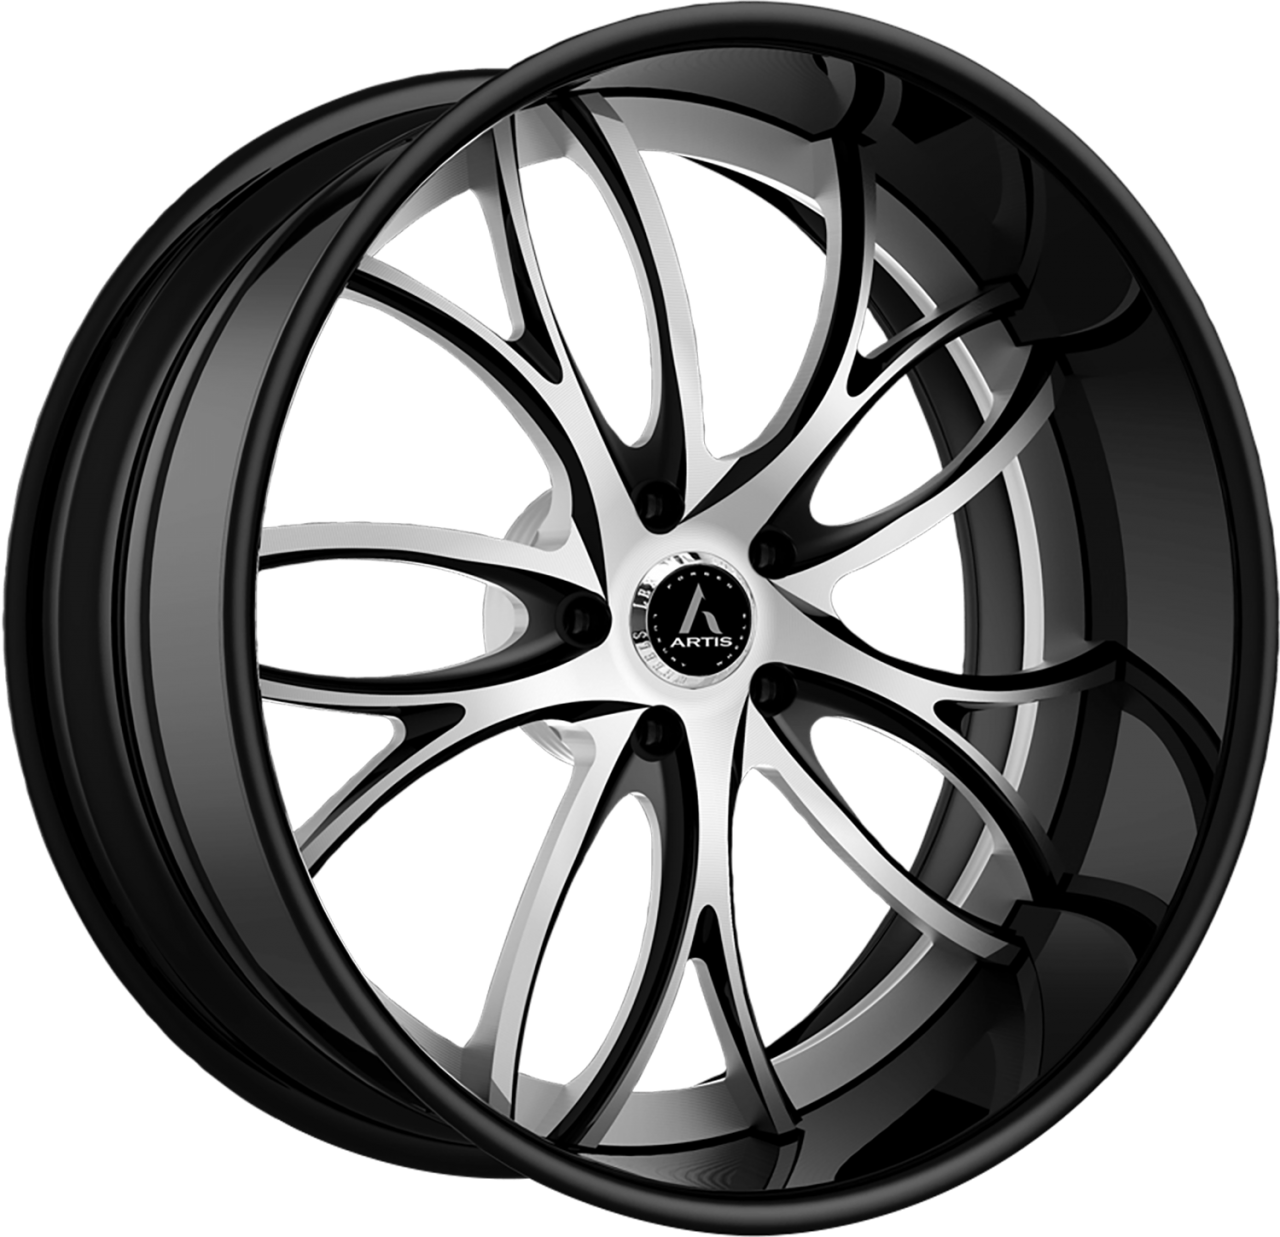 Artis Forged Biscayne wheel with Custom Black and White finish